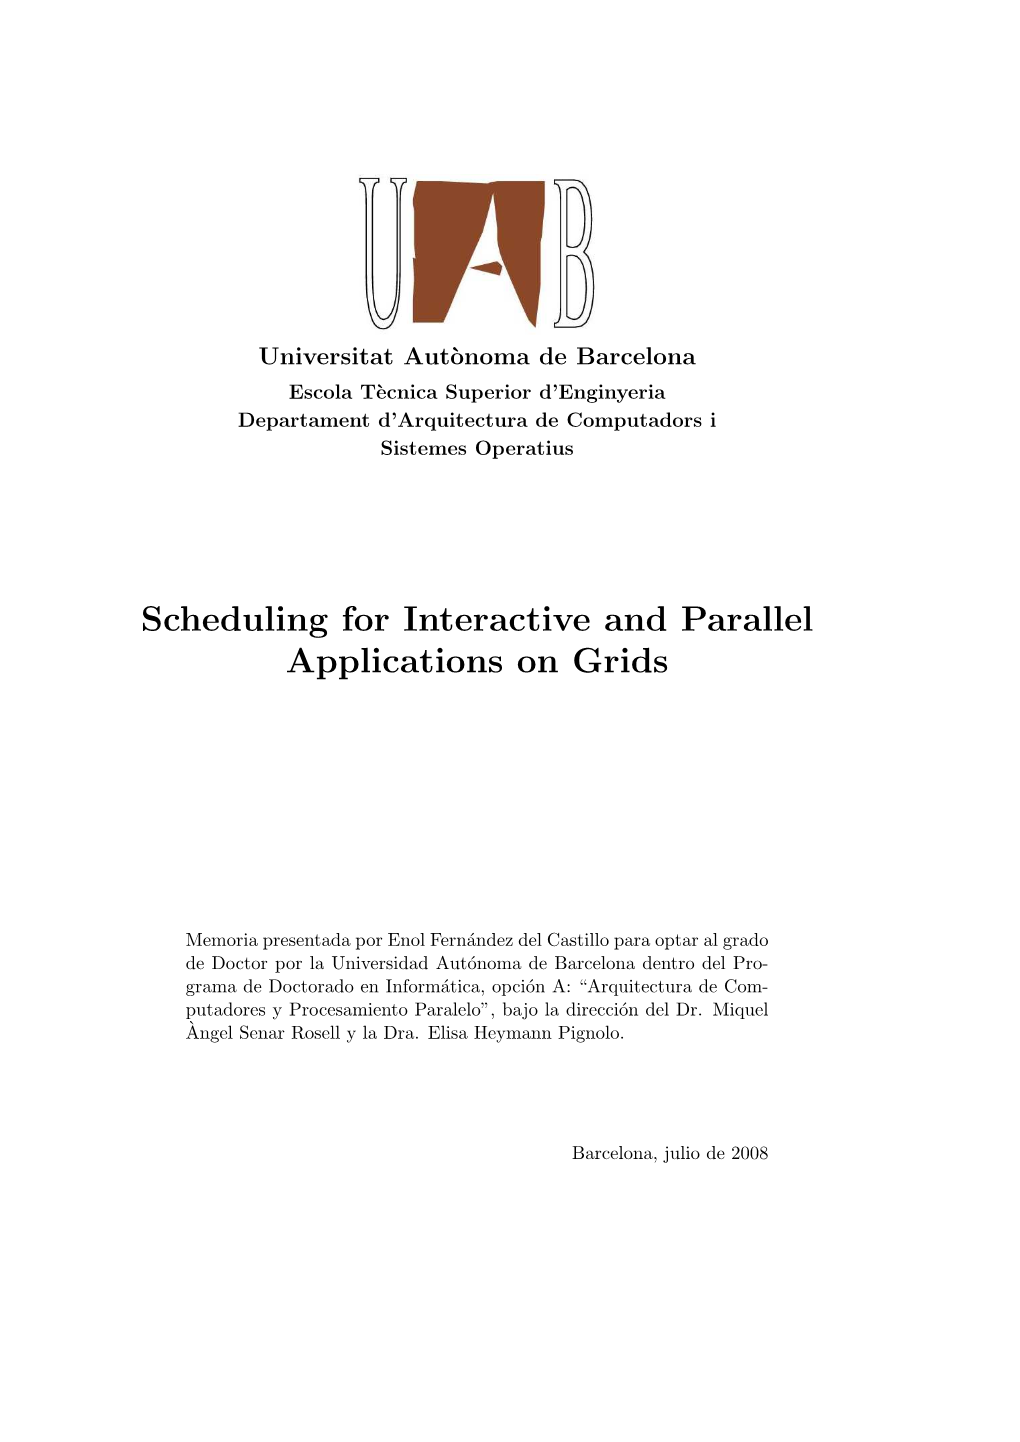 Scheduling for Interactive and Parallel Applications on Grids